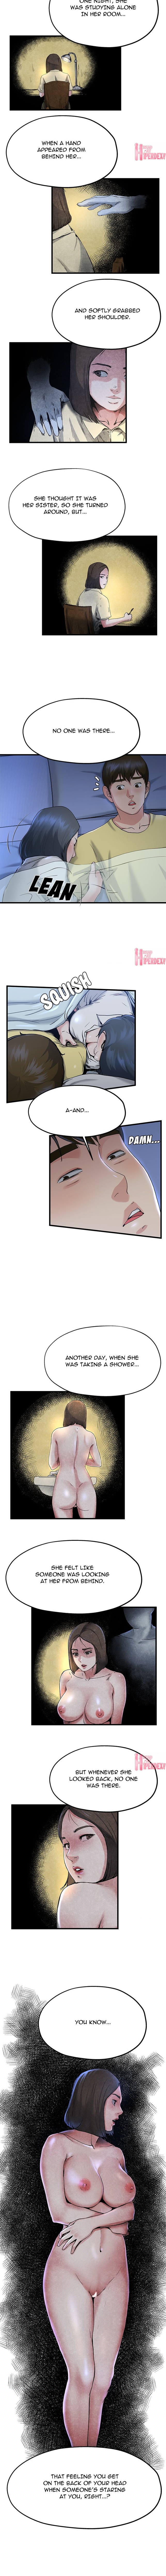 My Memory of You - Chapter 10 Page 6